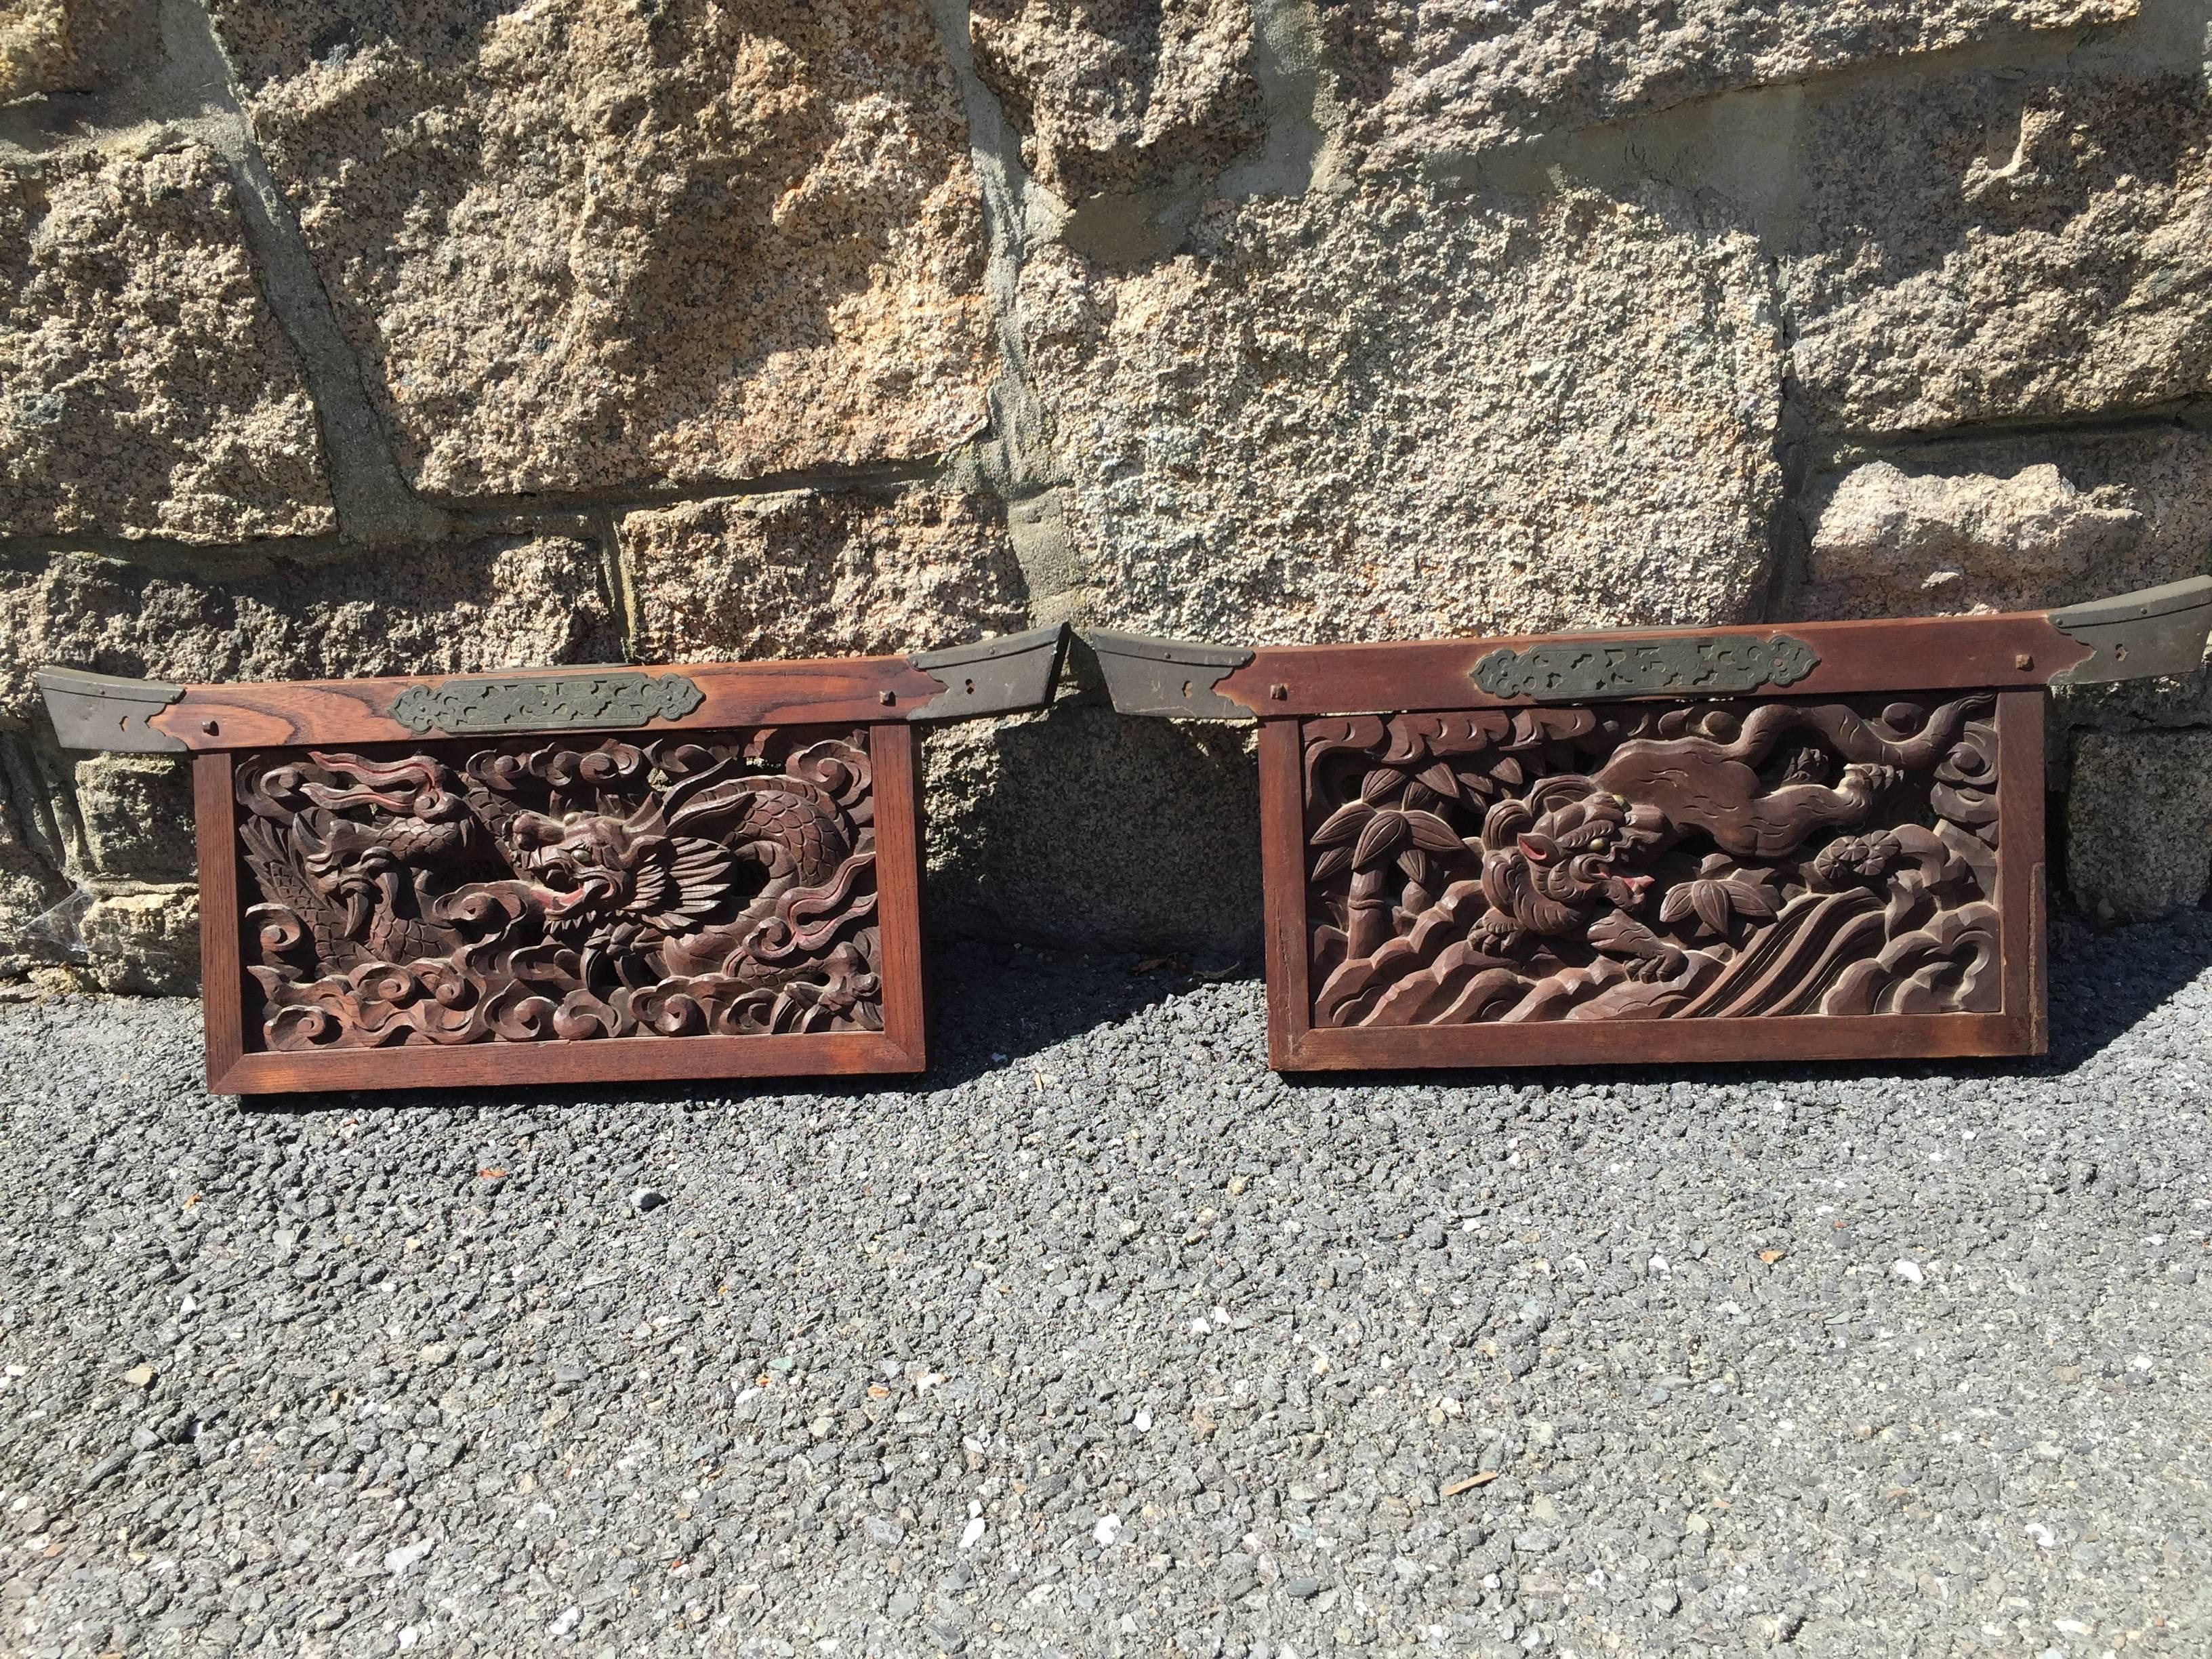 Japan, a one of a kind pair of Torii form Shinto Shrine hand-carved wooden Dragon and Tiger Temple wall ornaments, Taisho period (1912-1926)

Dimensions: 11 inches high and 28 inches wide

Fine quality replete with glass eyes for dragon and tiger